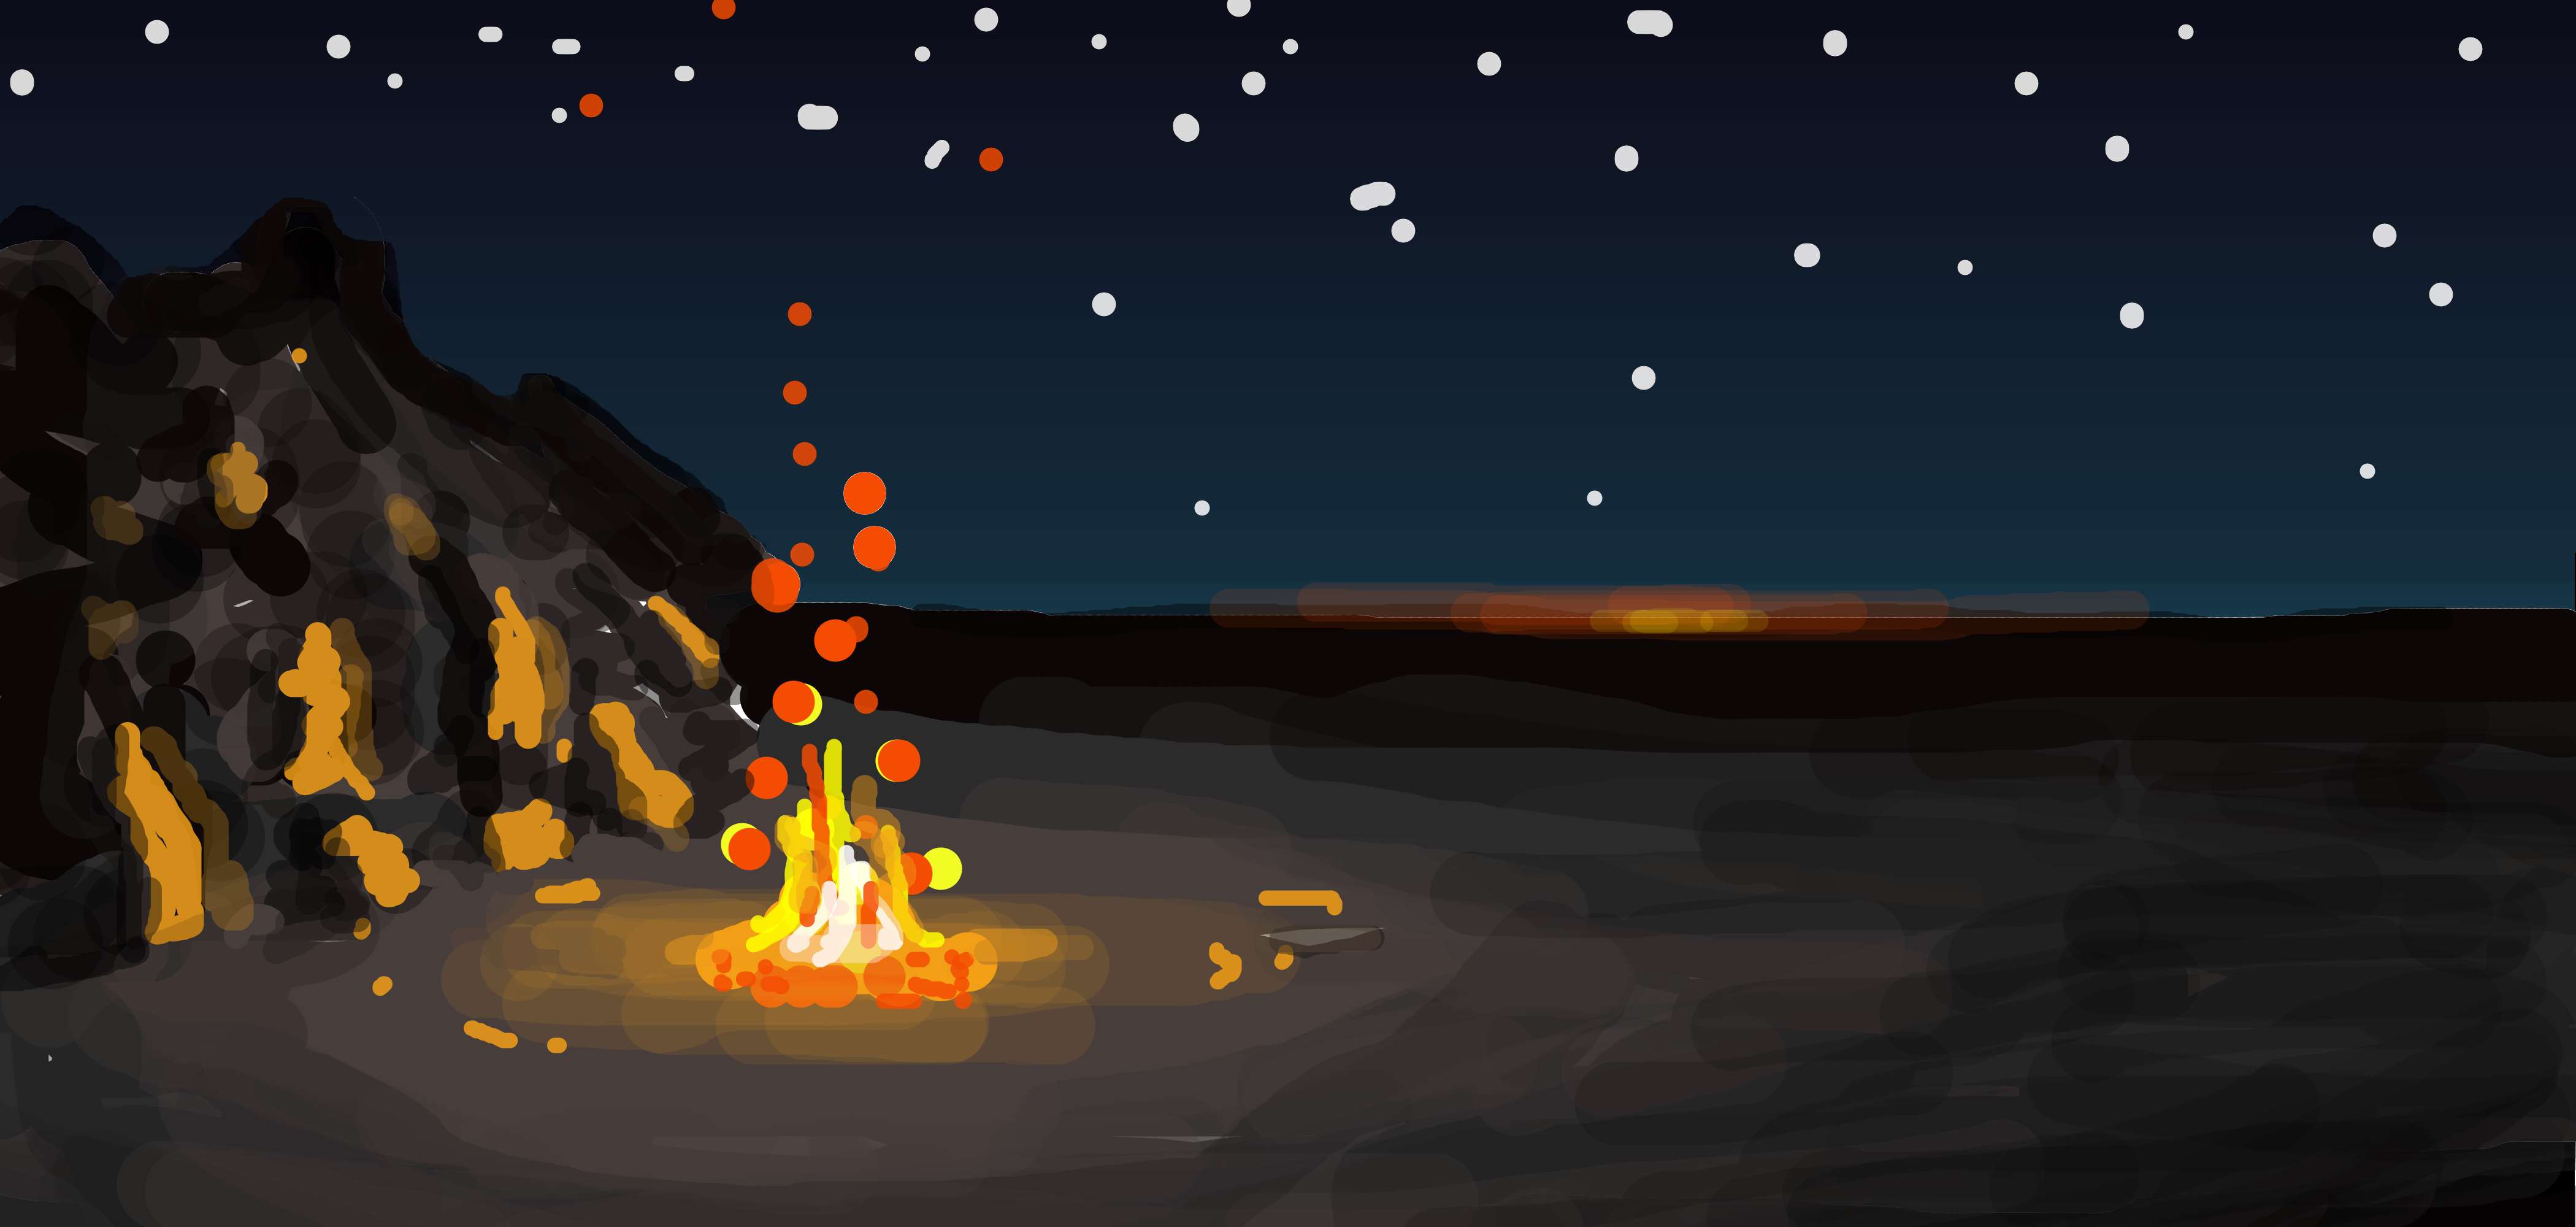 sketch of a campfire lighting up the rocky outcropping at the edge of a large desert, just after sunset.